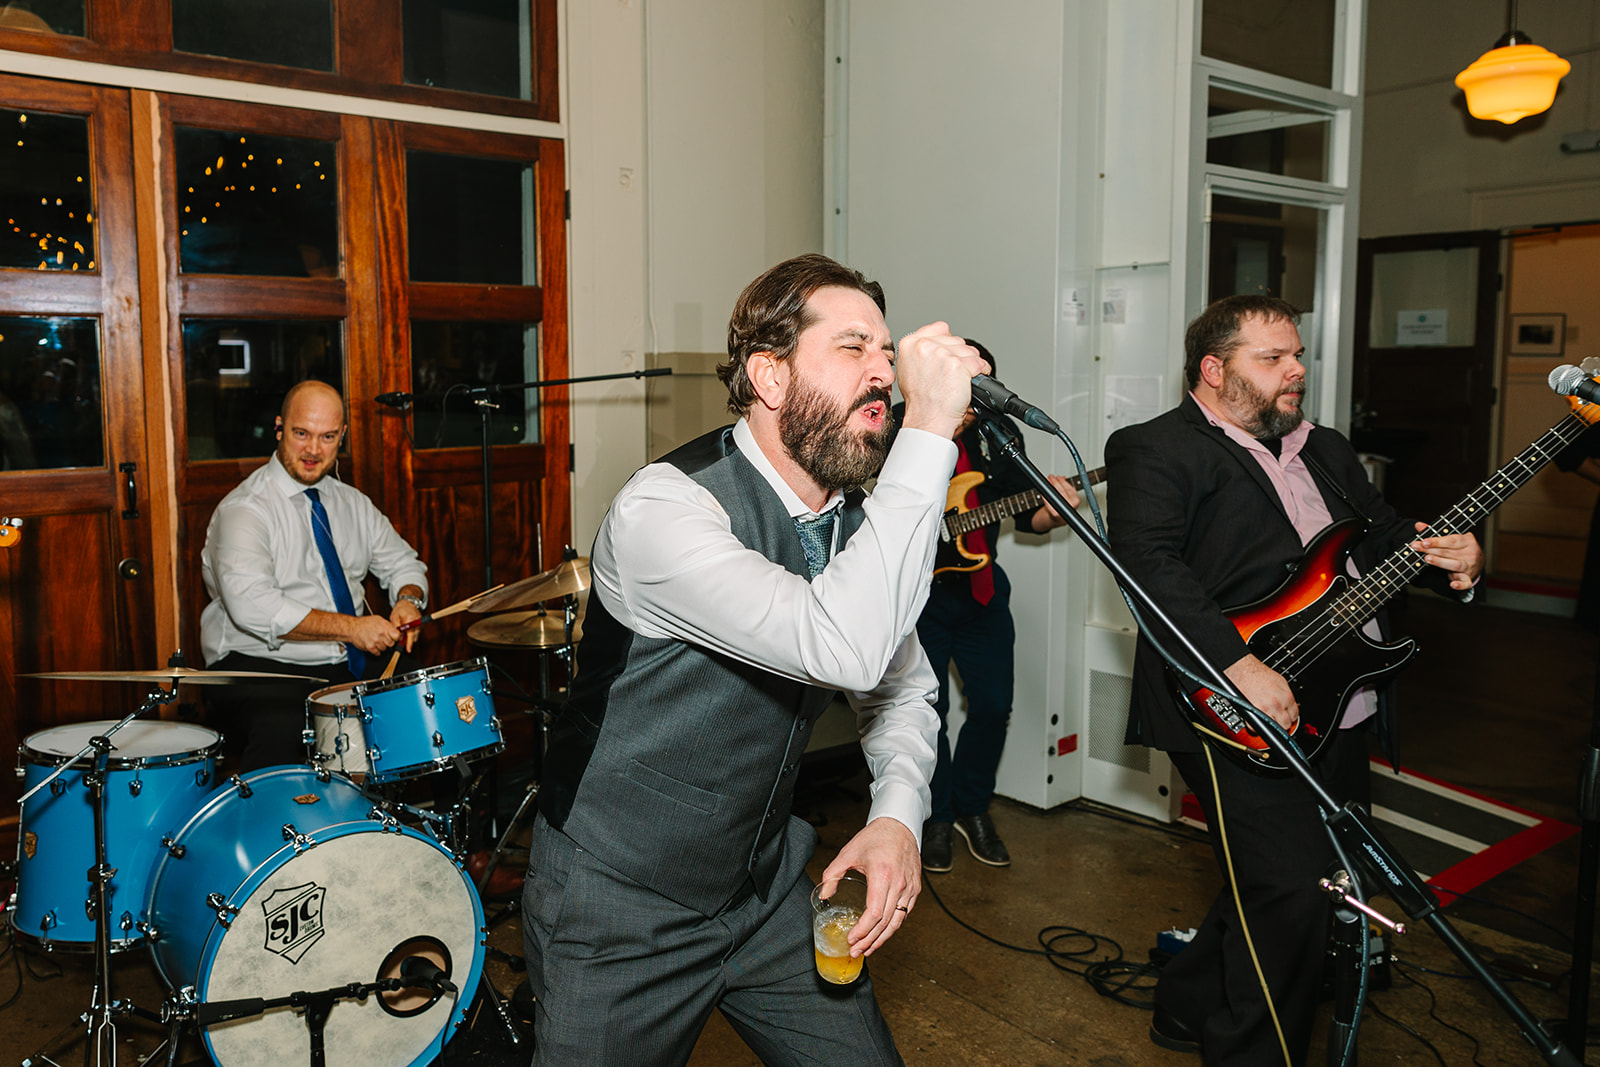 Groom singing with his band during wedding reception